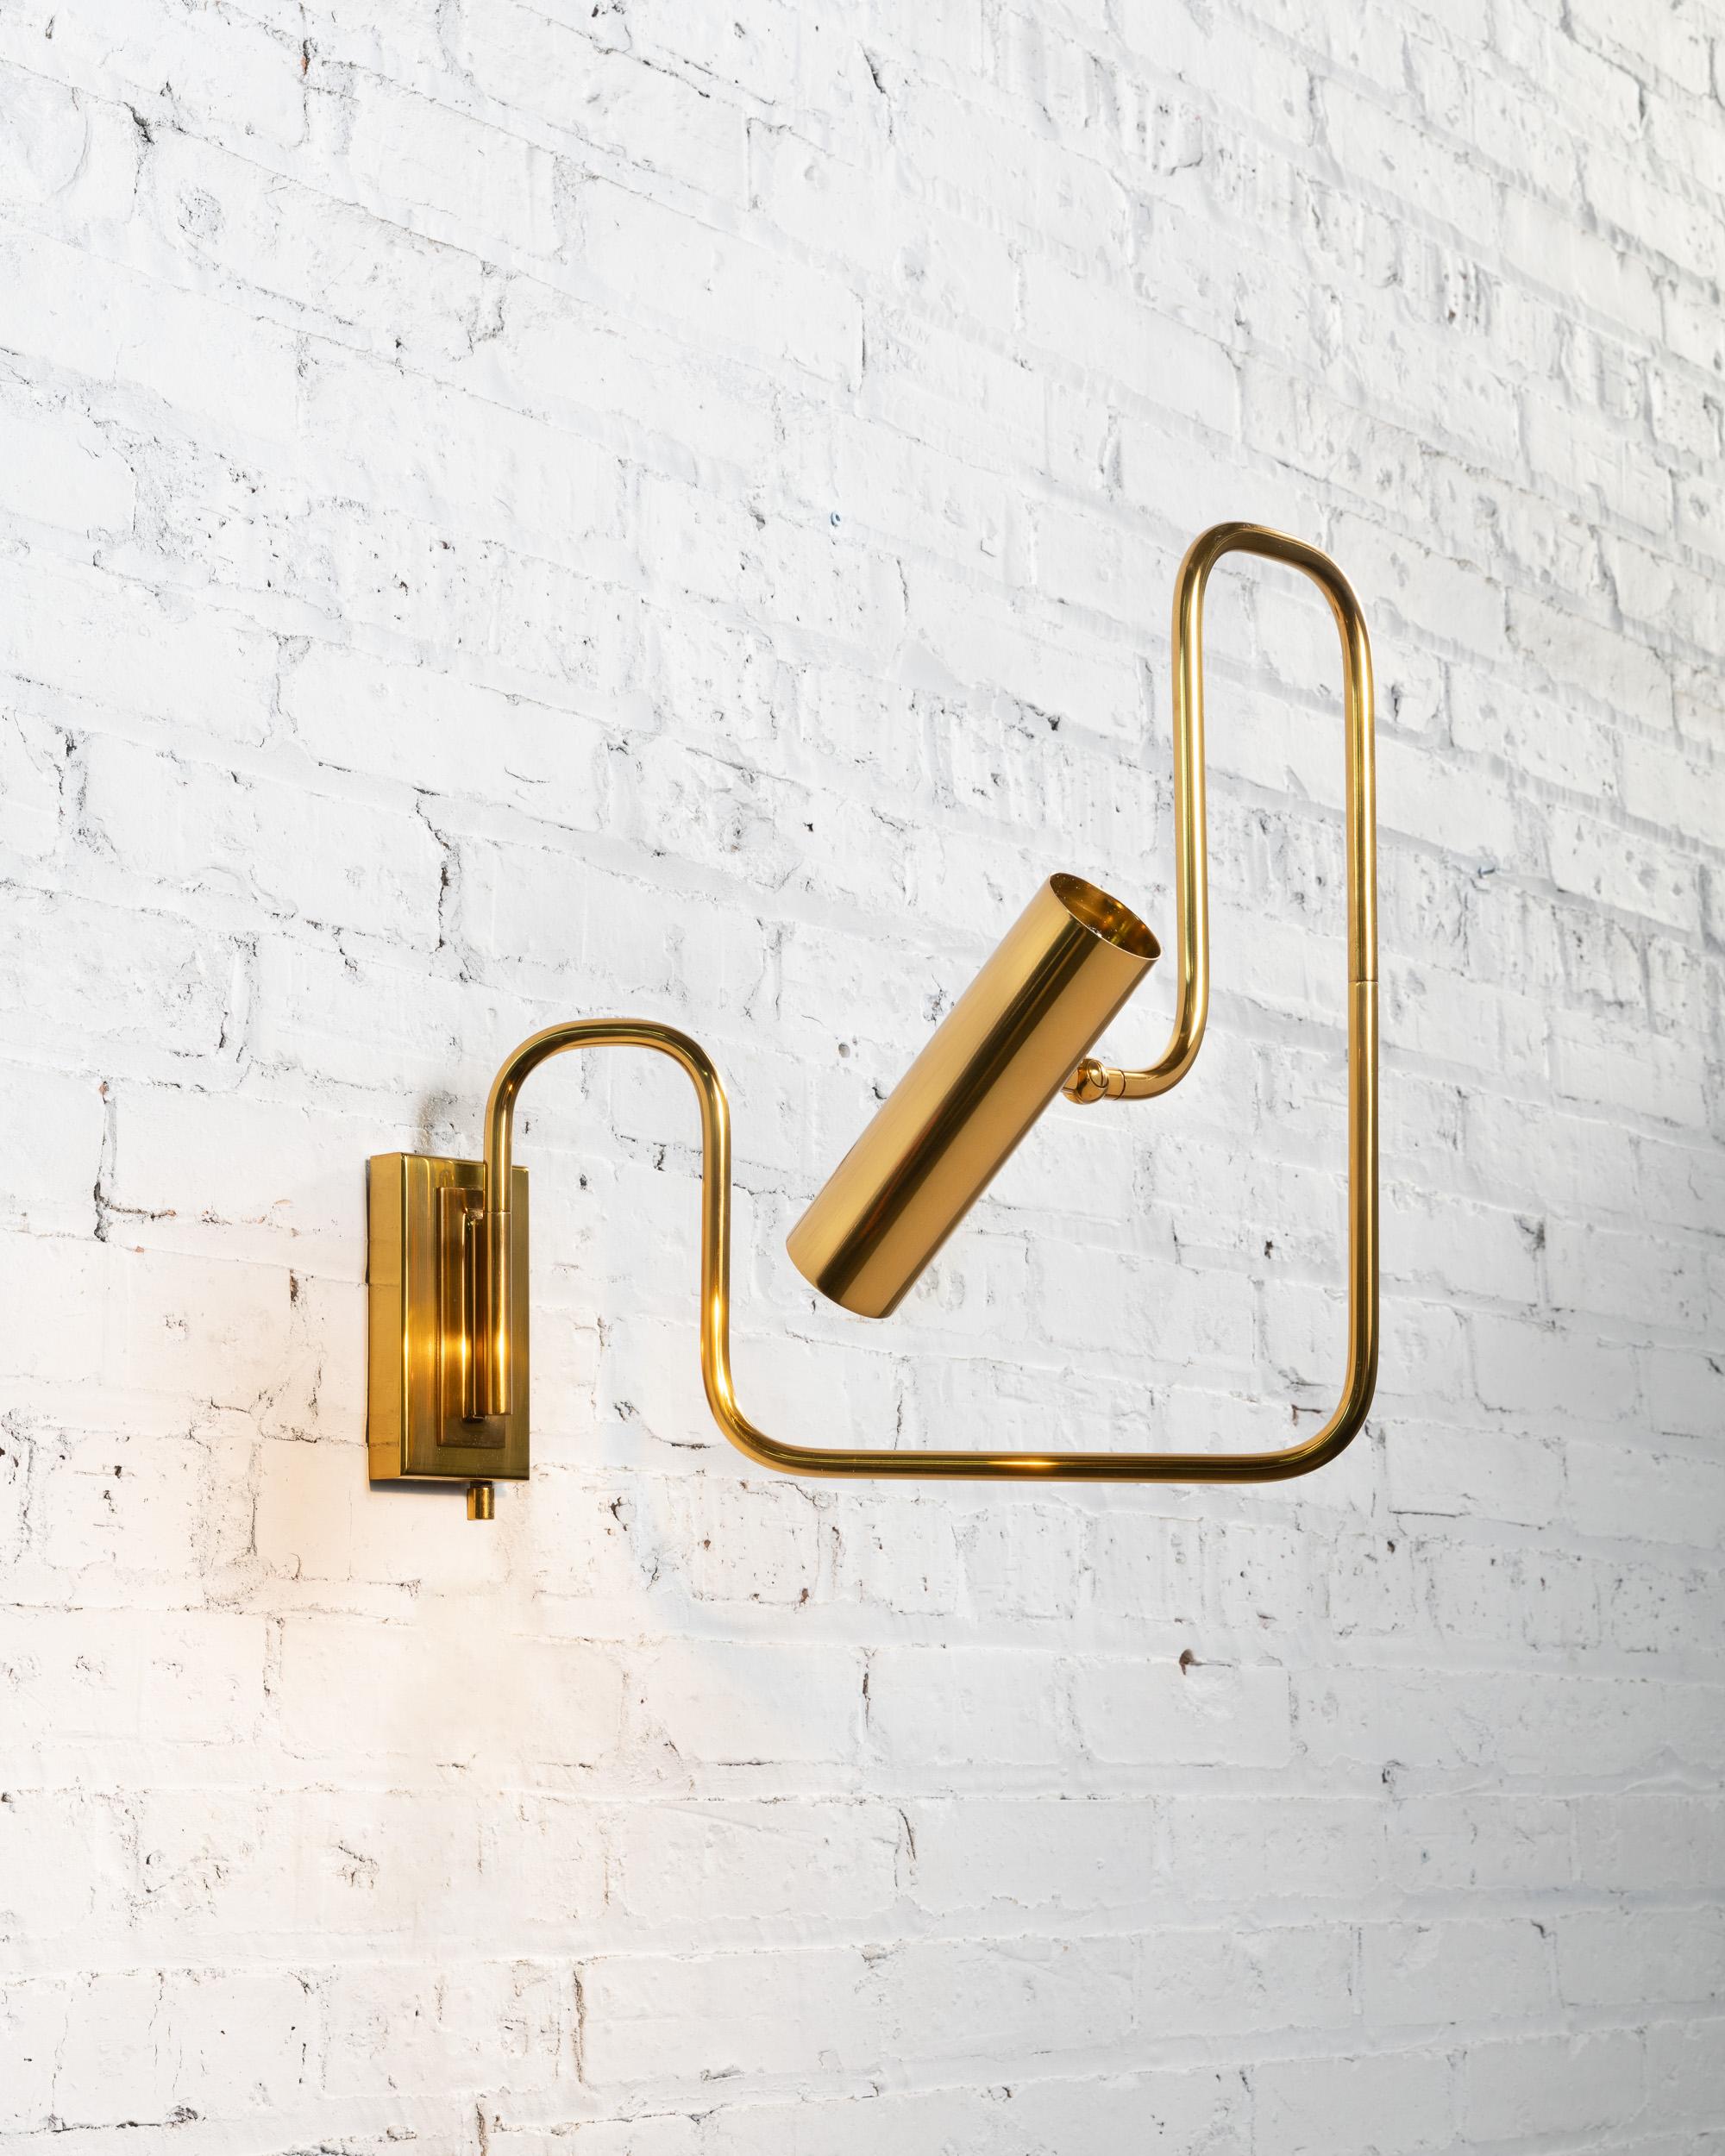 Patinated Pivot Single Wall Sconce with Articulating Arms in Polished Tarnished Brass For Sale